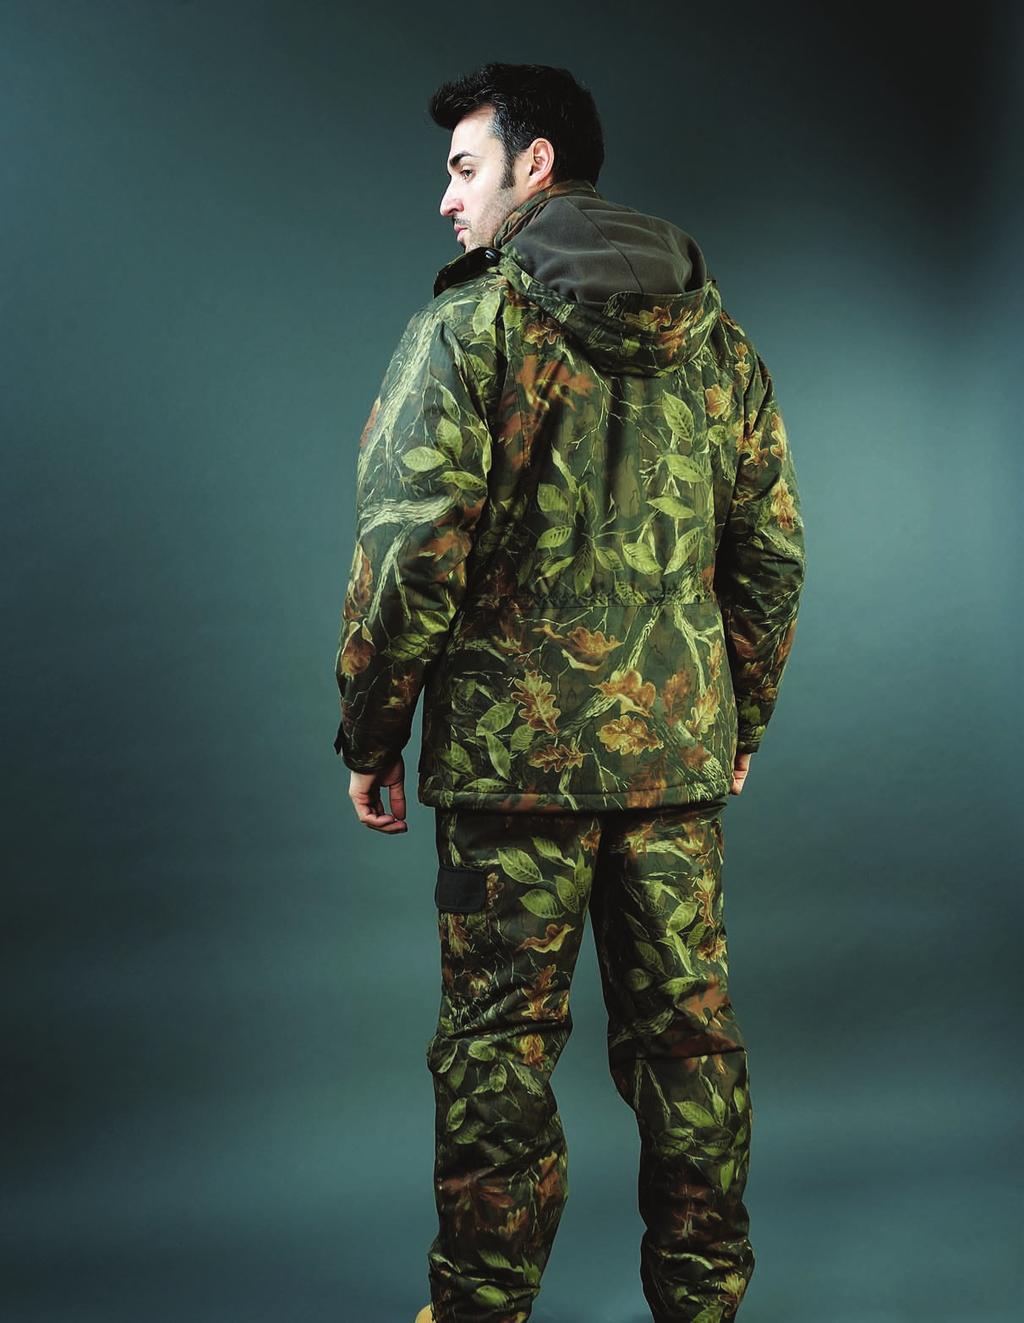 CAMOUFLAGE WINTER HUNTING SUIT The foliage is intercontinental and will function as well in Europe as overseas.